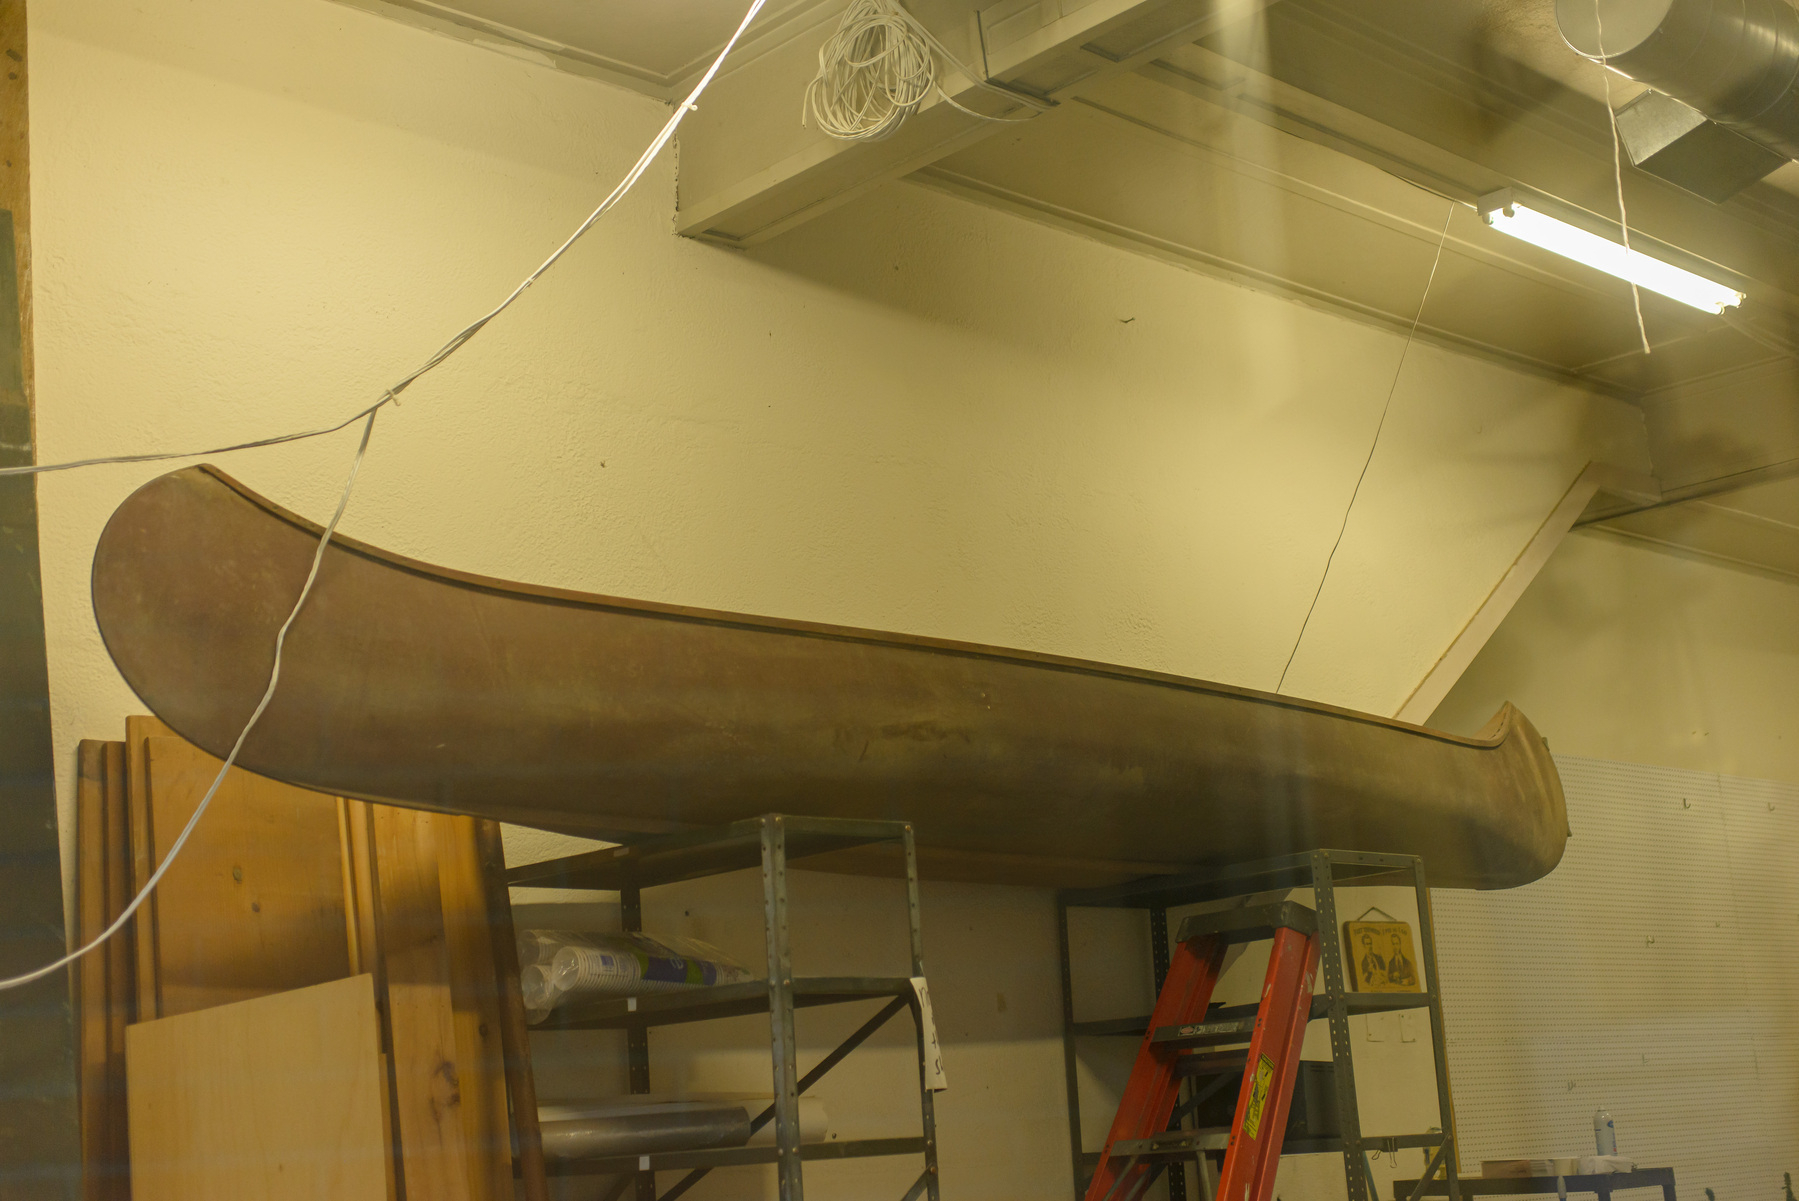 antique canoe siting on top of metal shelving units in a high ceiling space 